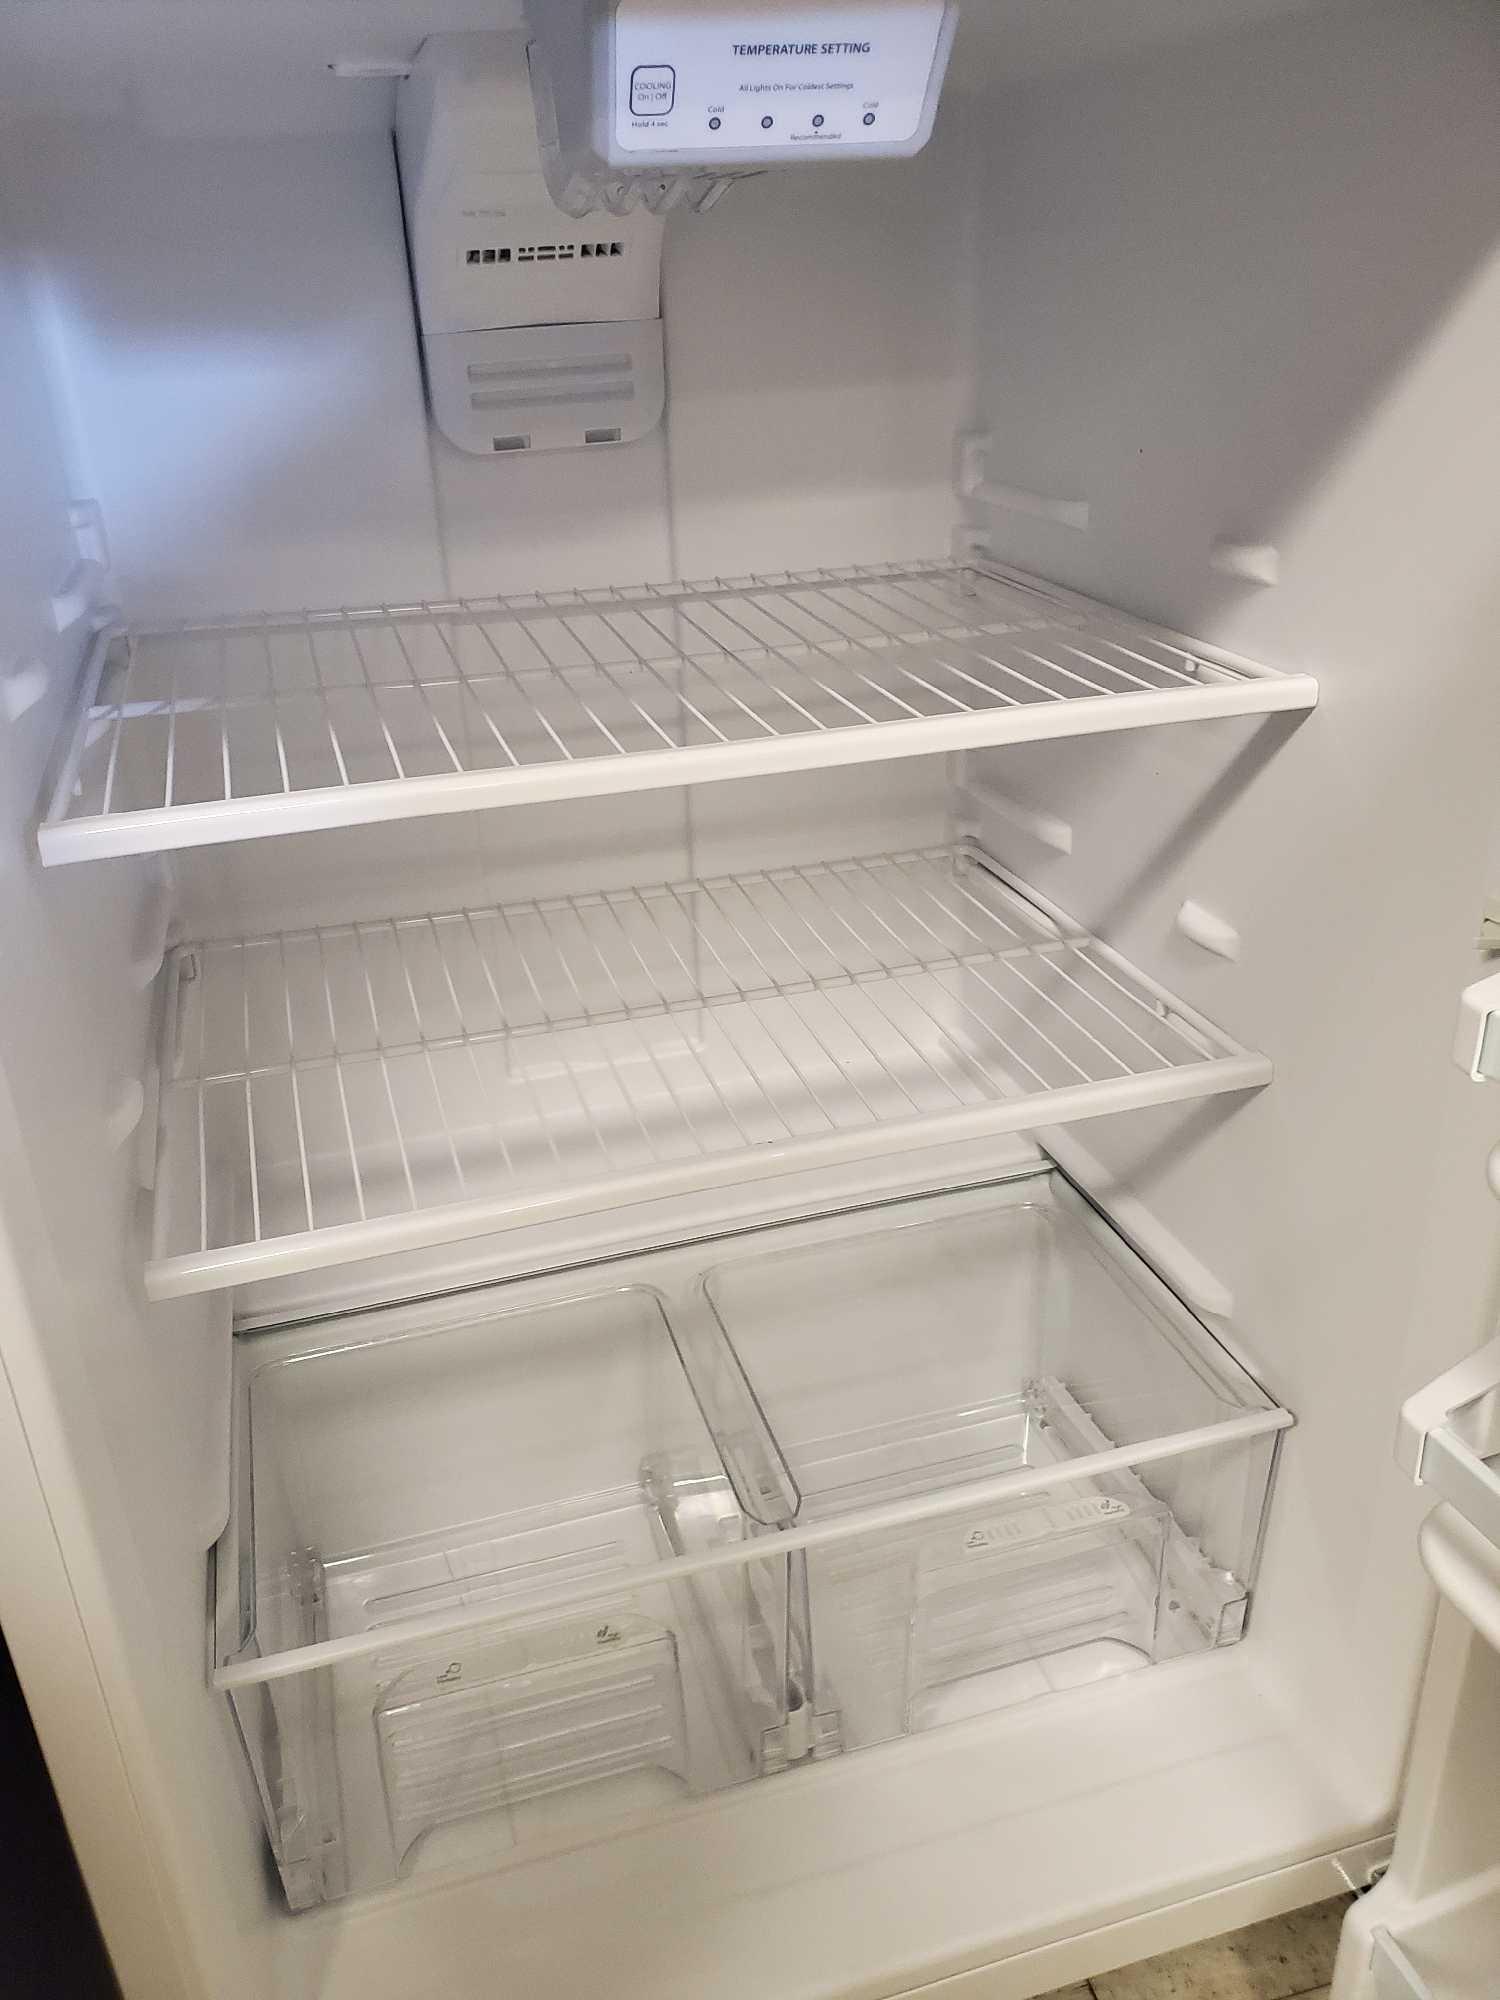 30-inch Amana... Top-Freezer Refrigerator with Glass Shelves, ART318FFDW, IN GREAT CONDITION, FRIDGE